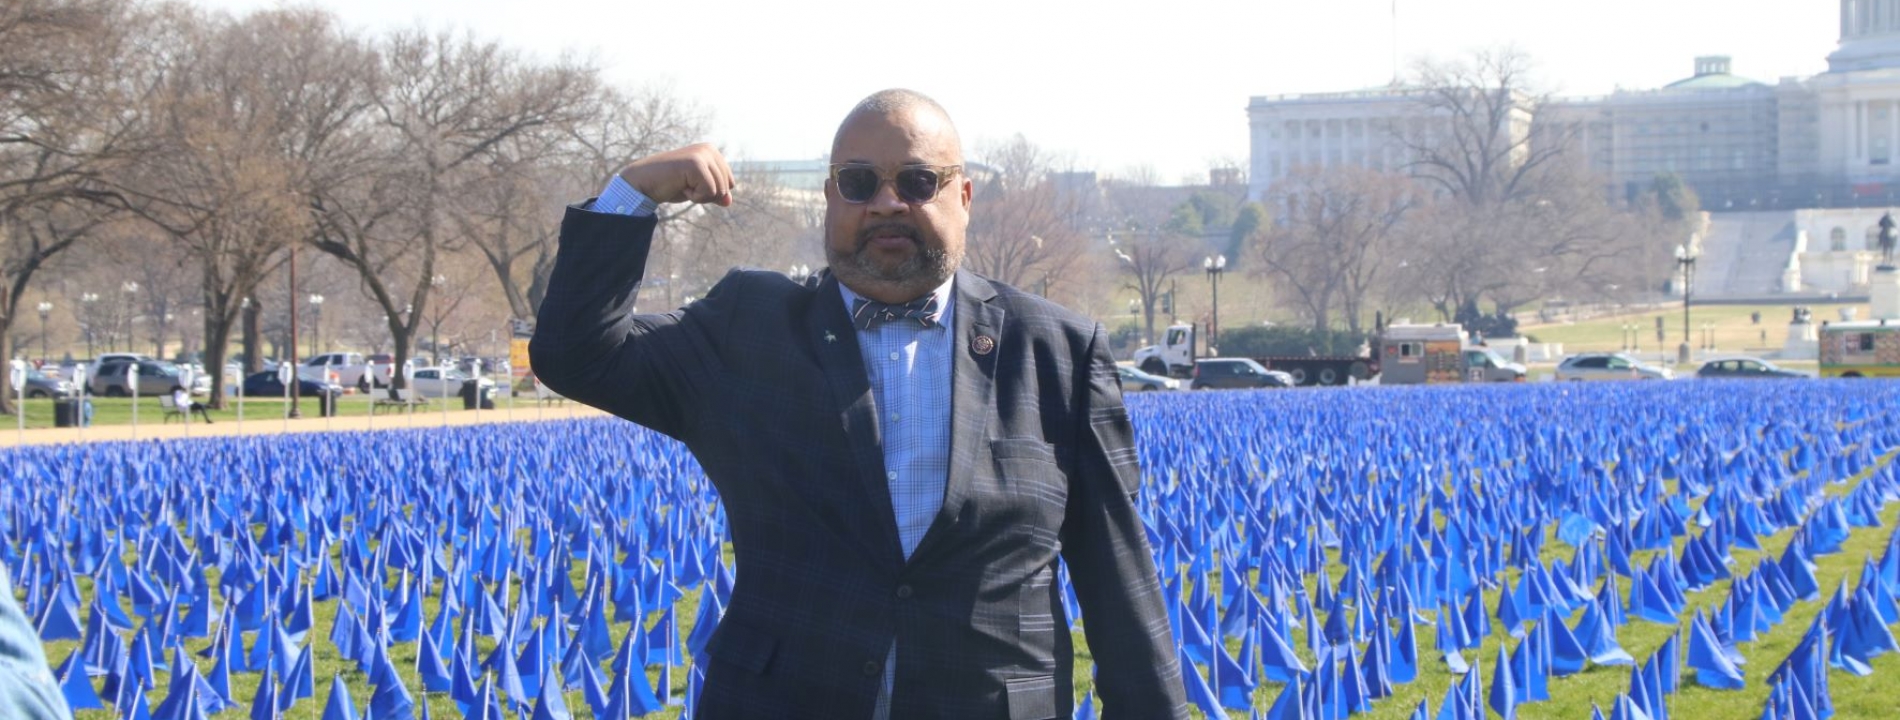 Rep. Payne, Jr. joins United in Blue Event